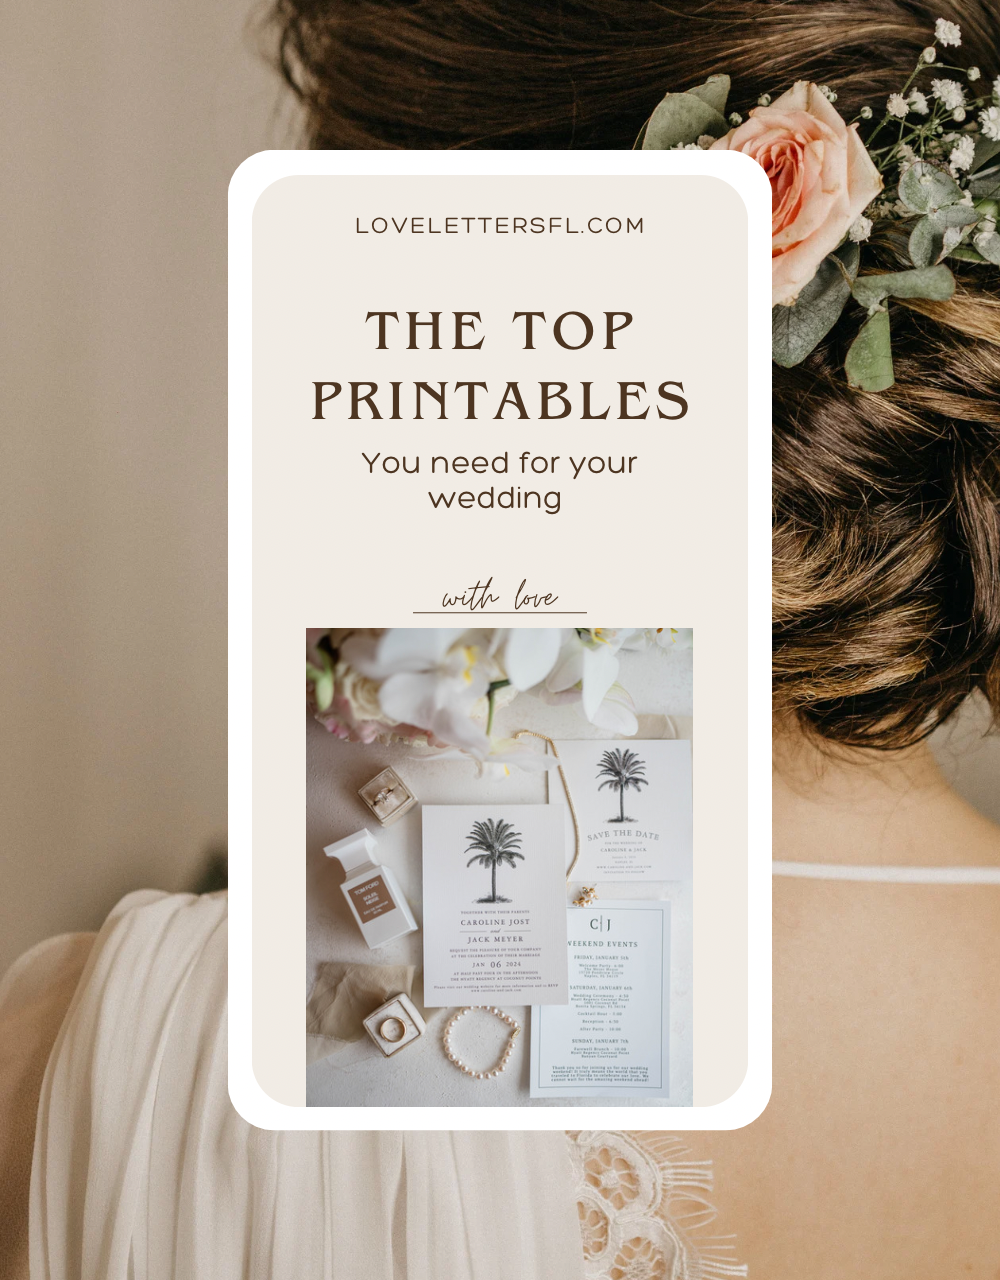 Top 10 Items to Print for your Wedding Day